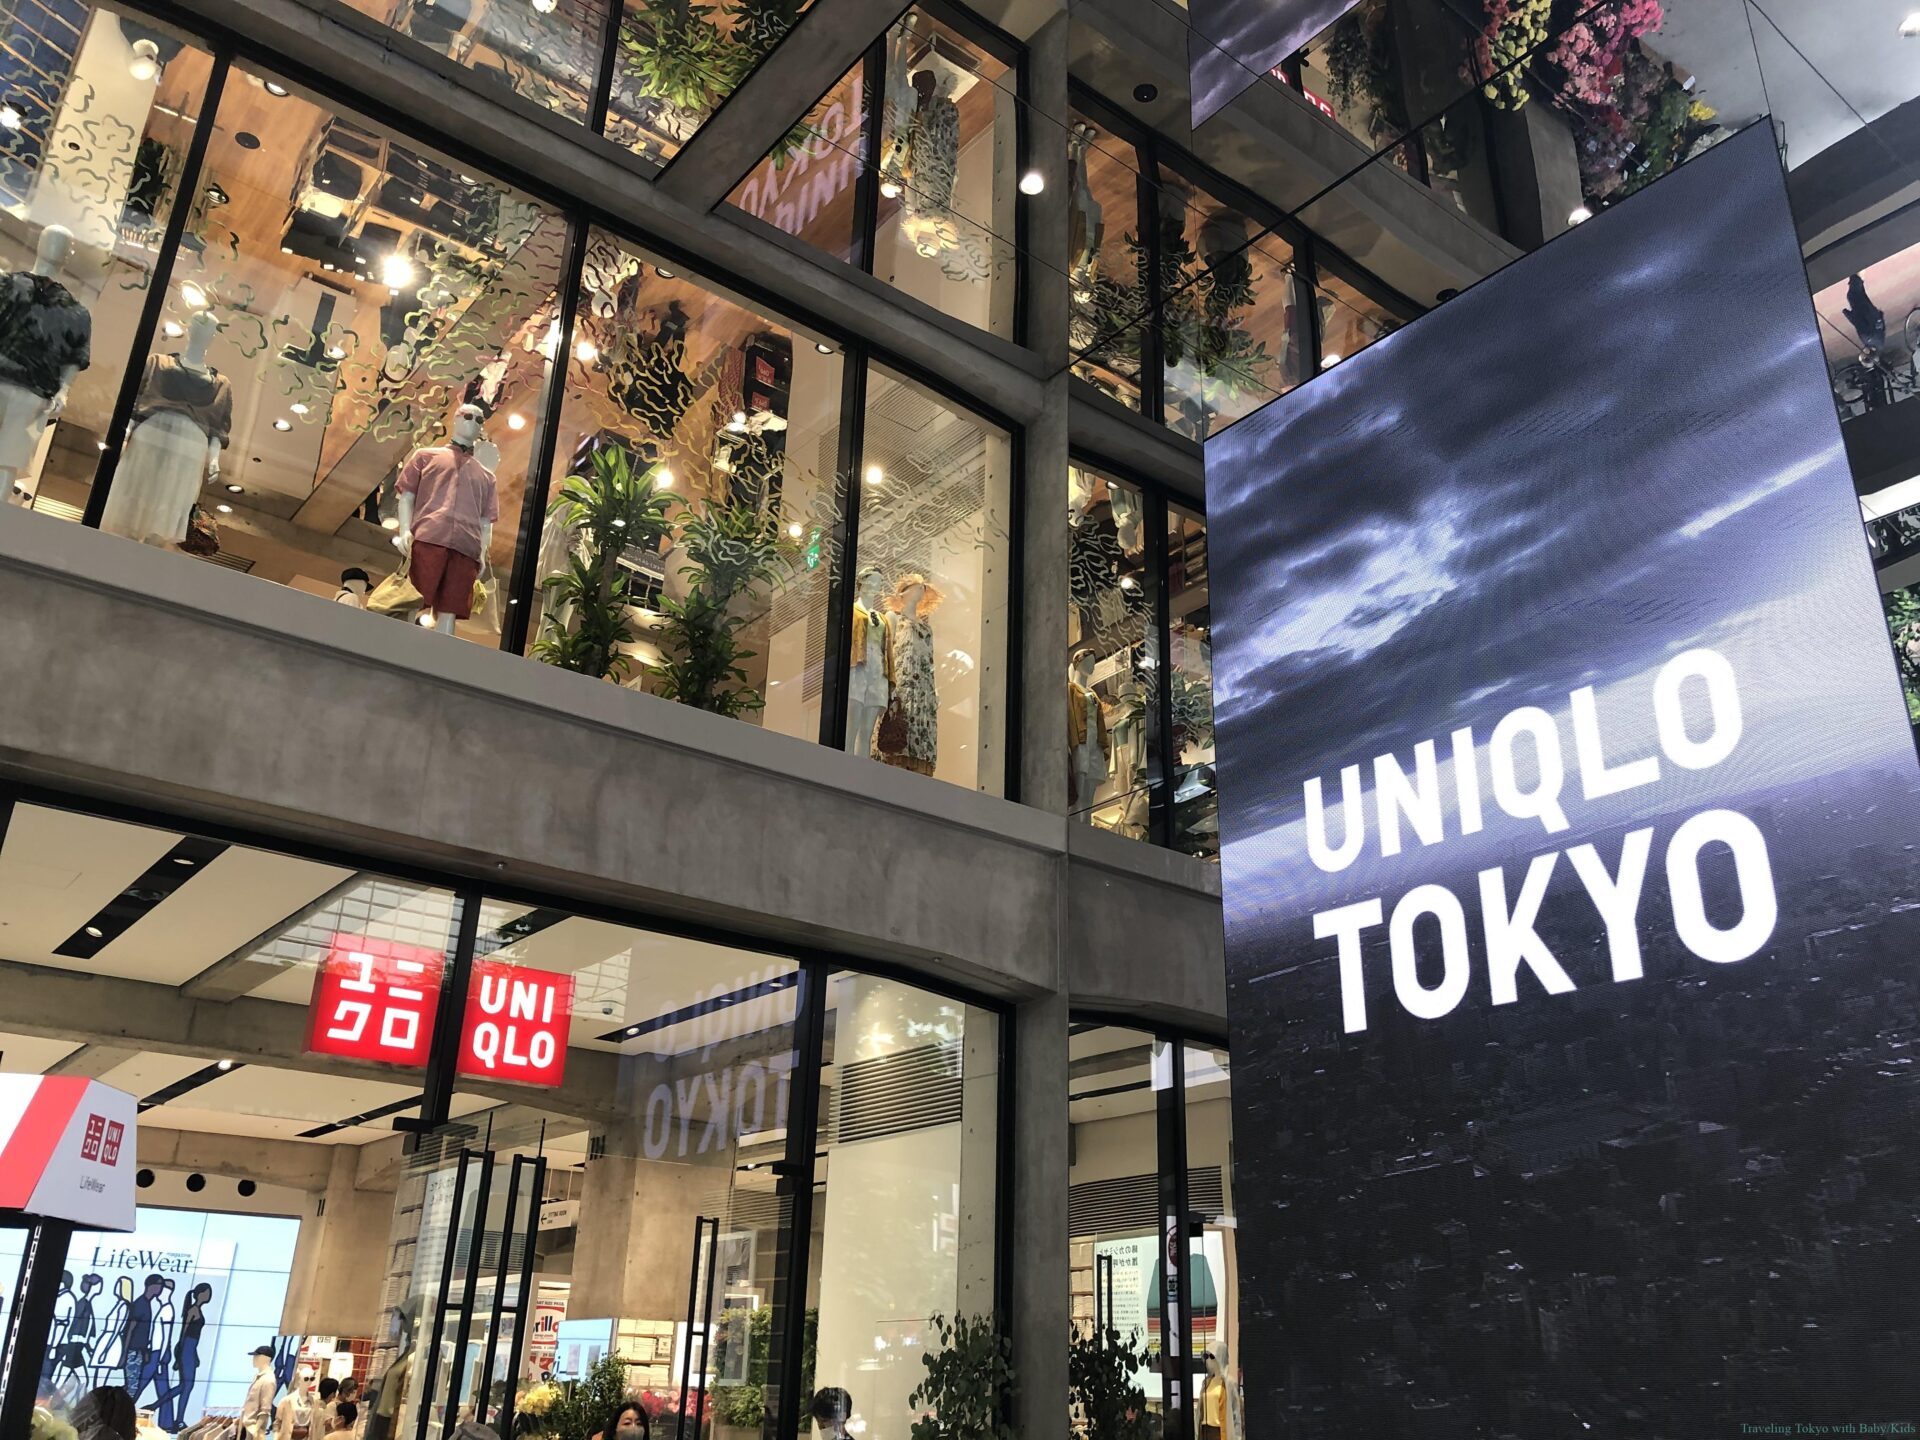 uniqlo tokyo ginza 2  Living  Nomads  Travel tips Guides News   Information